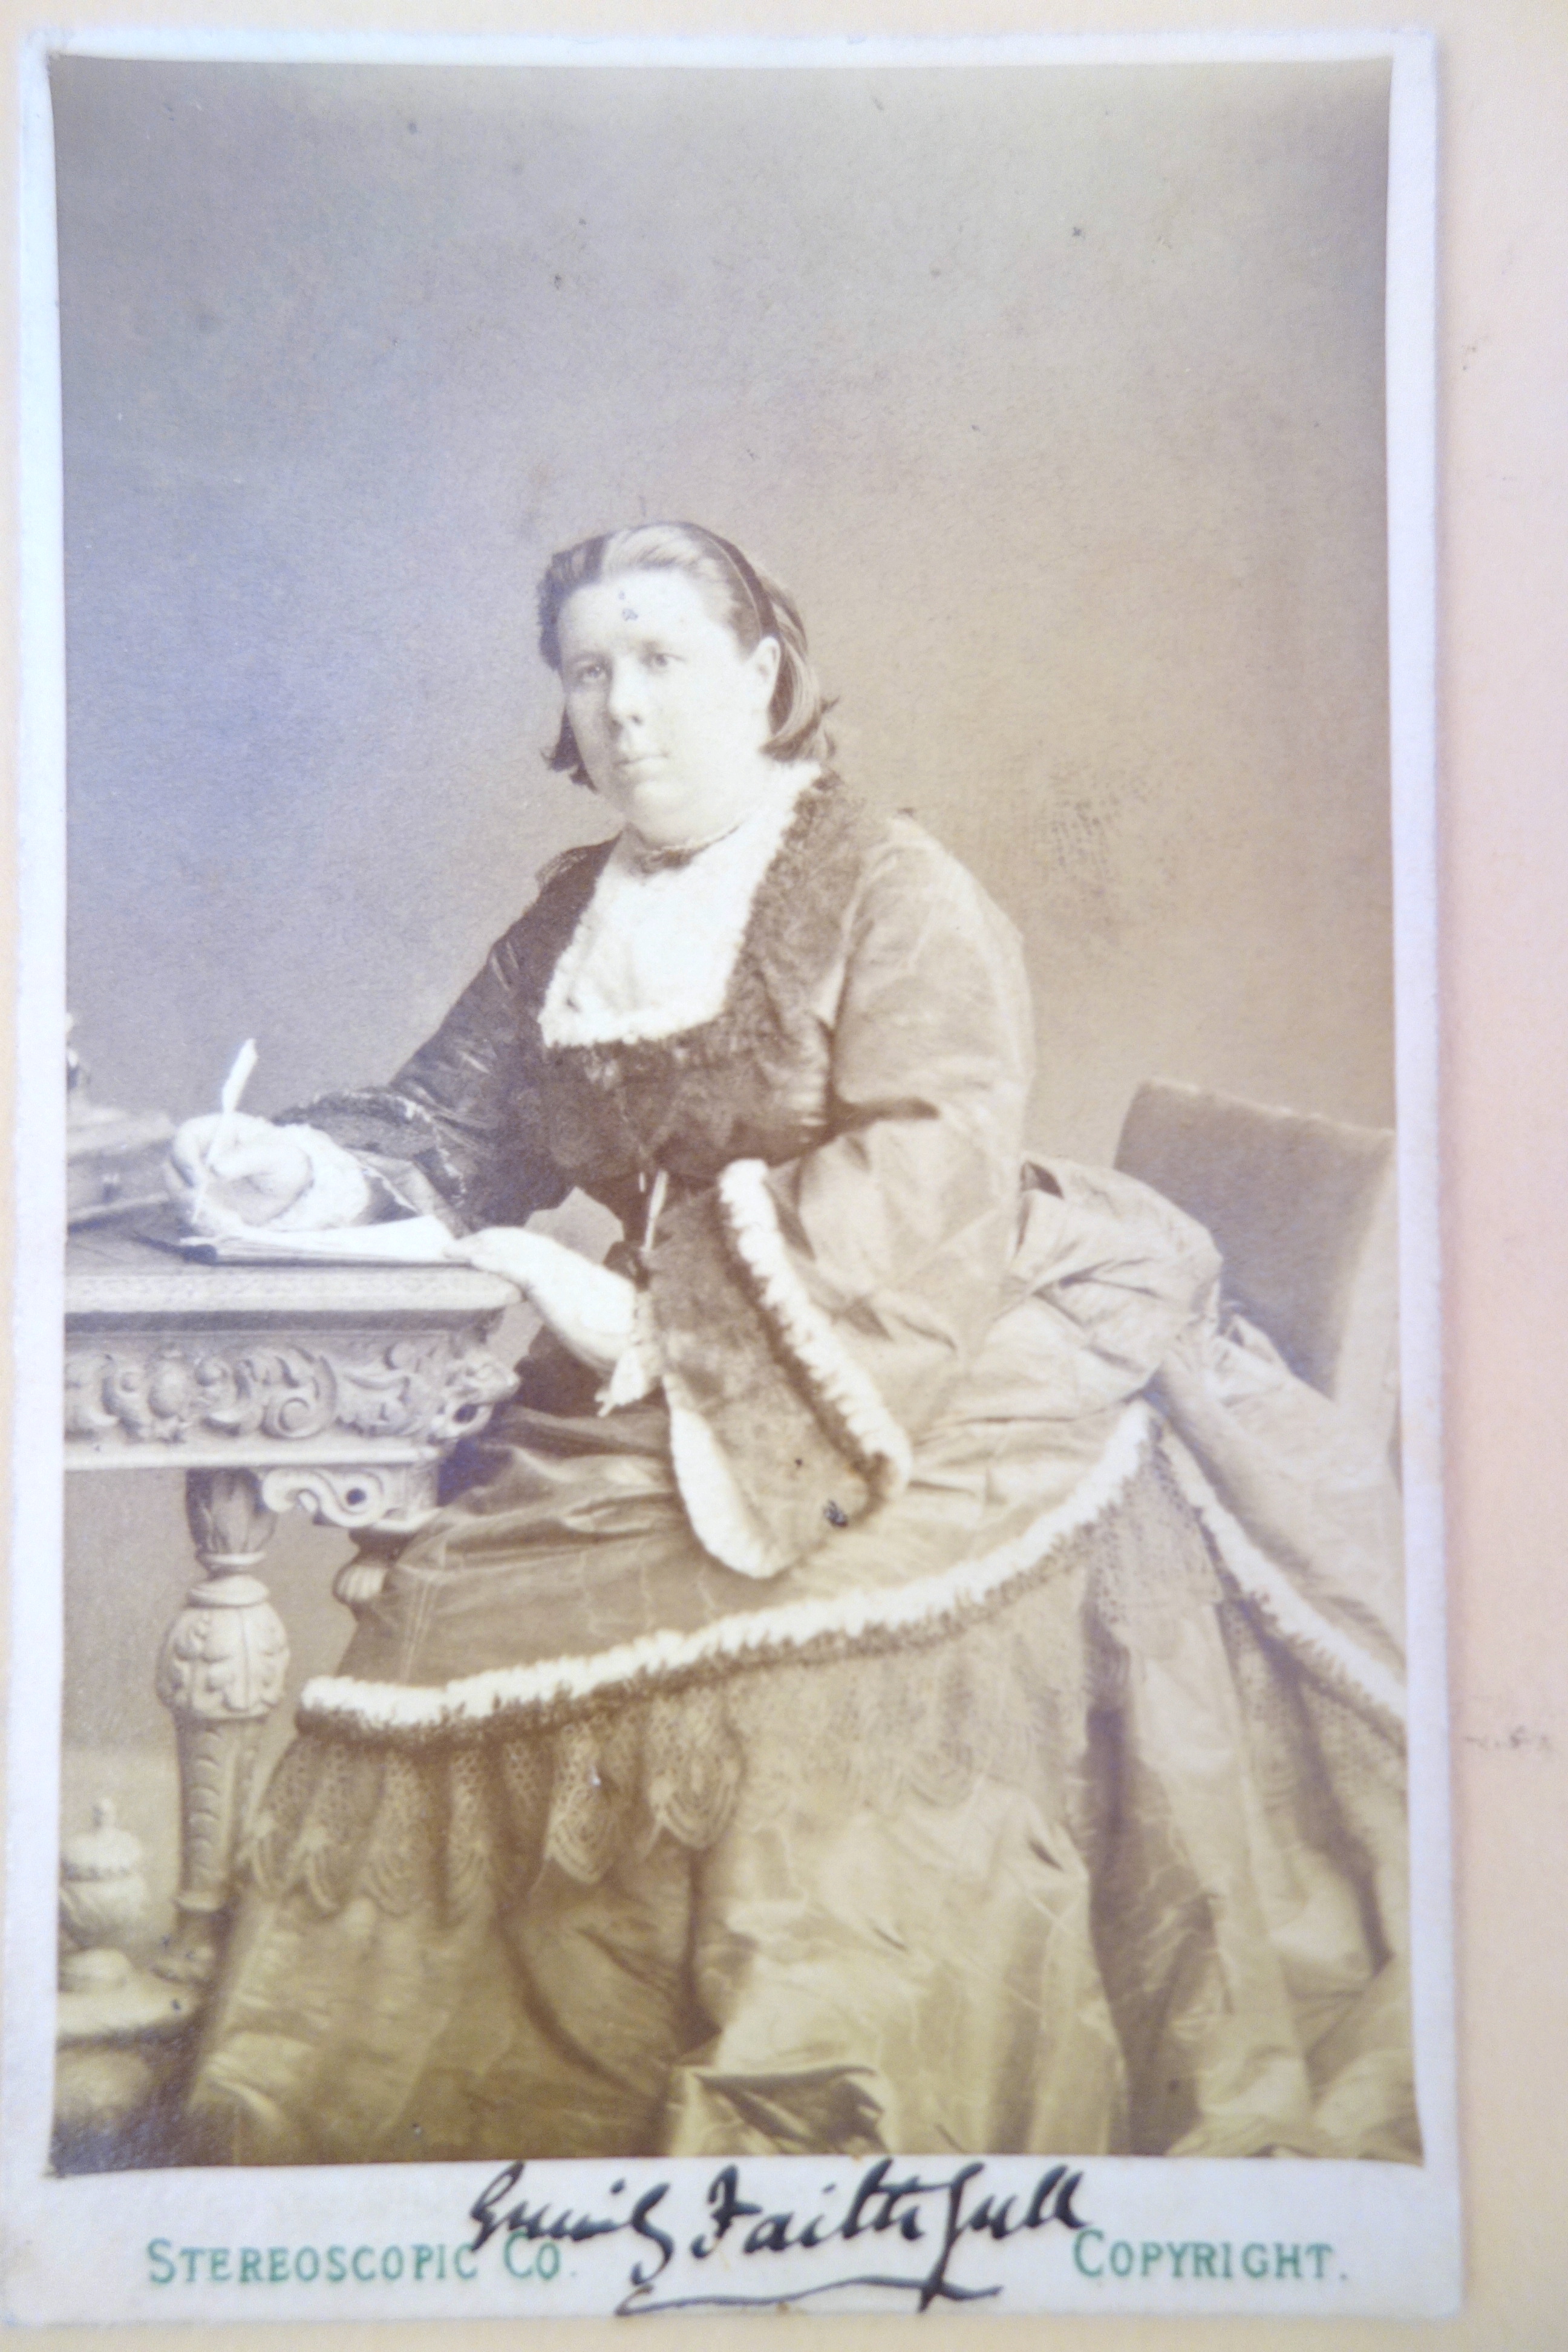 Carte de visit photograph of Faithfull with her autograph in the lower margin.